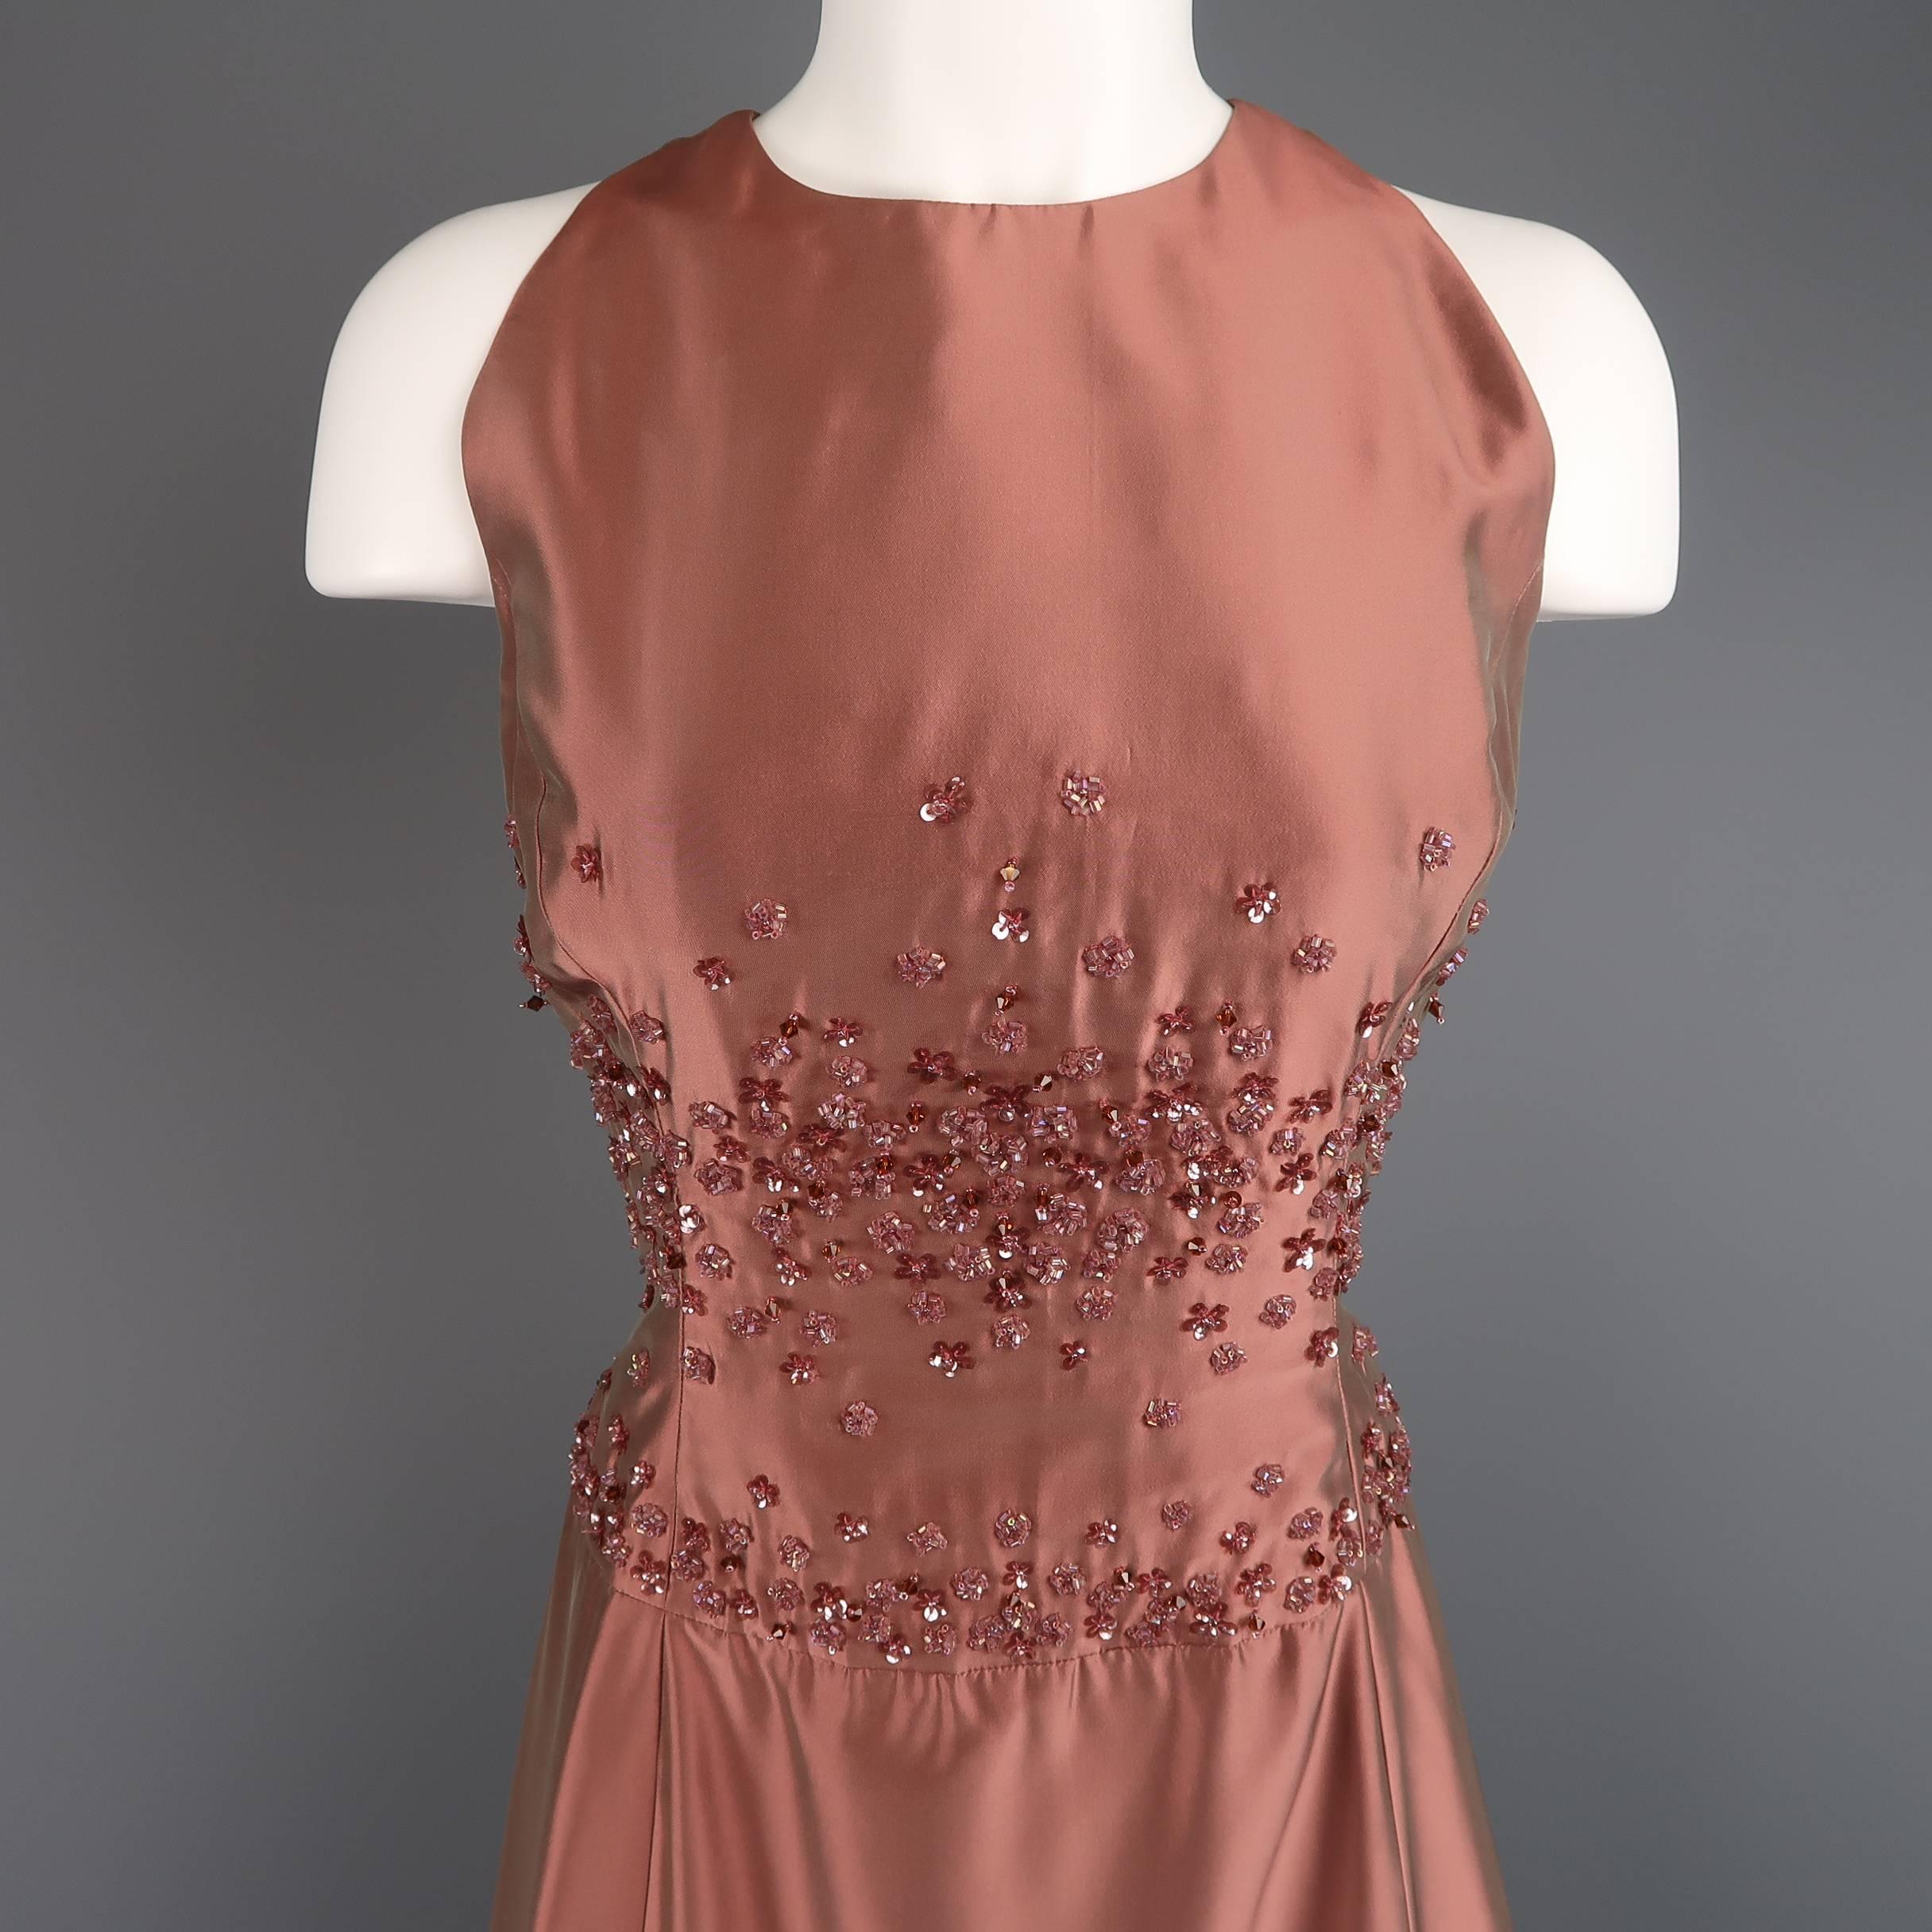 BADGLEY MISCHKA sleeveless evening gown comes in a dusty rose iridescent silk taffeta and features a round neckline, full length A line skirt, and floral beadwork through the bodice. Stain on side near hem and small spot on front. As-Is. Made in